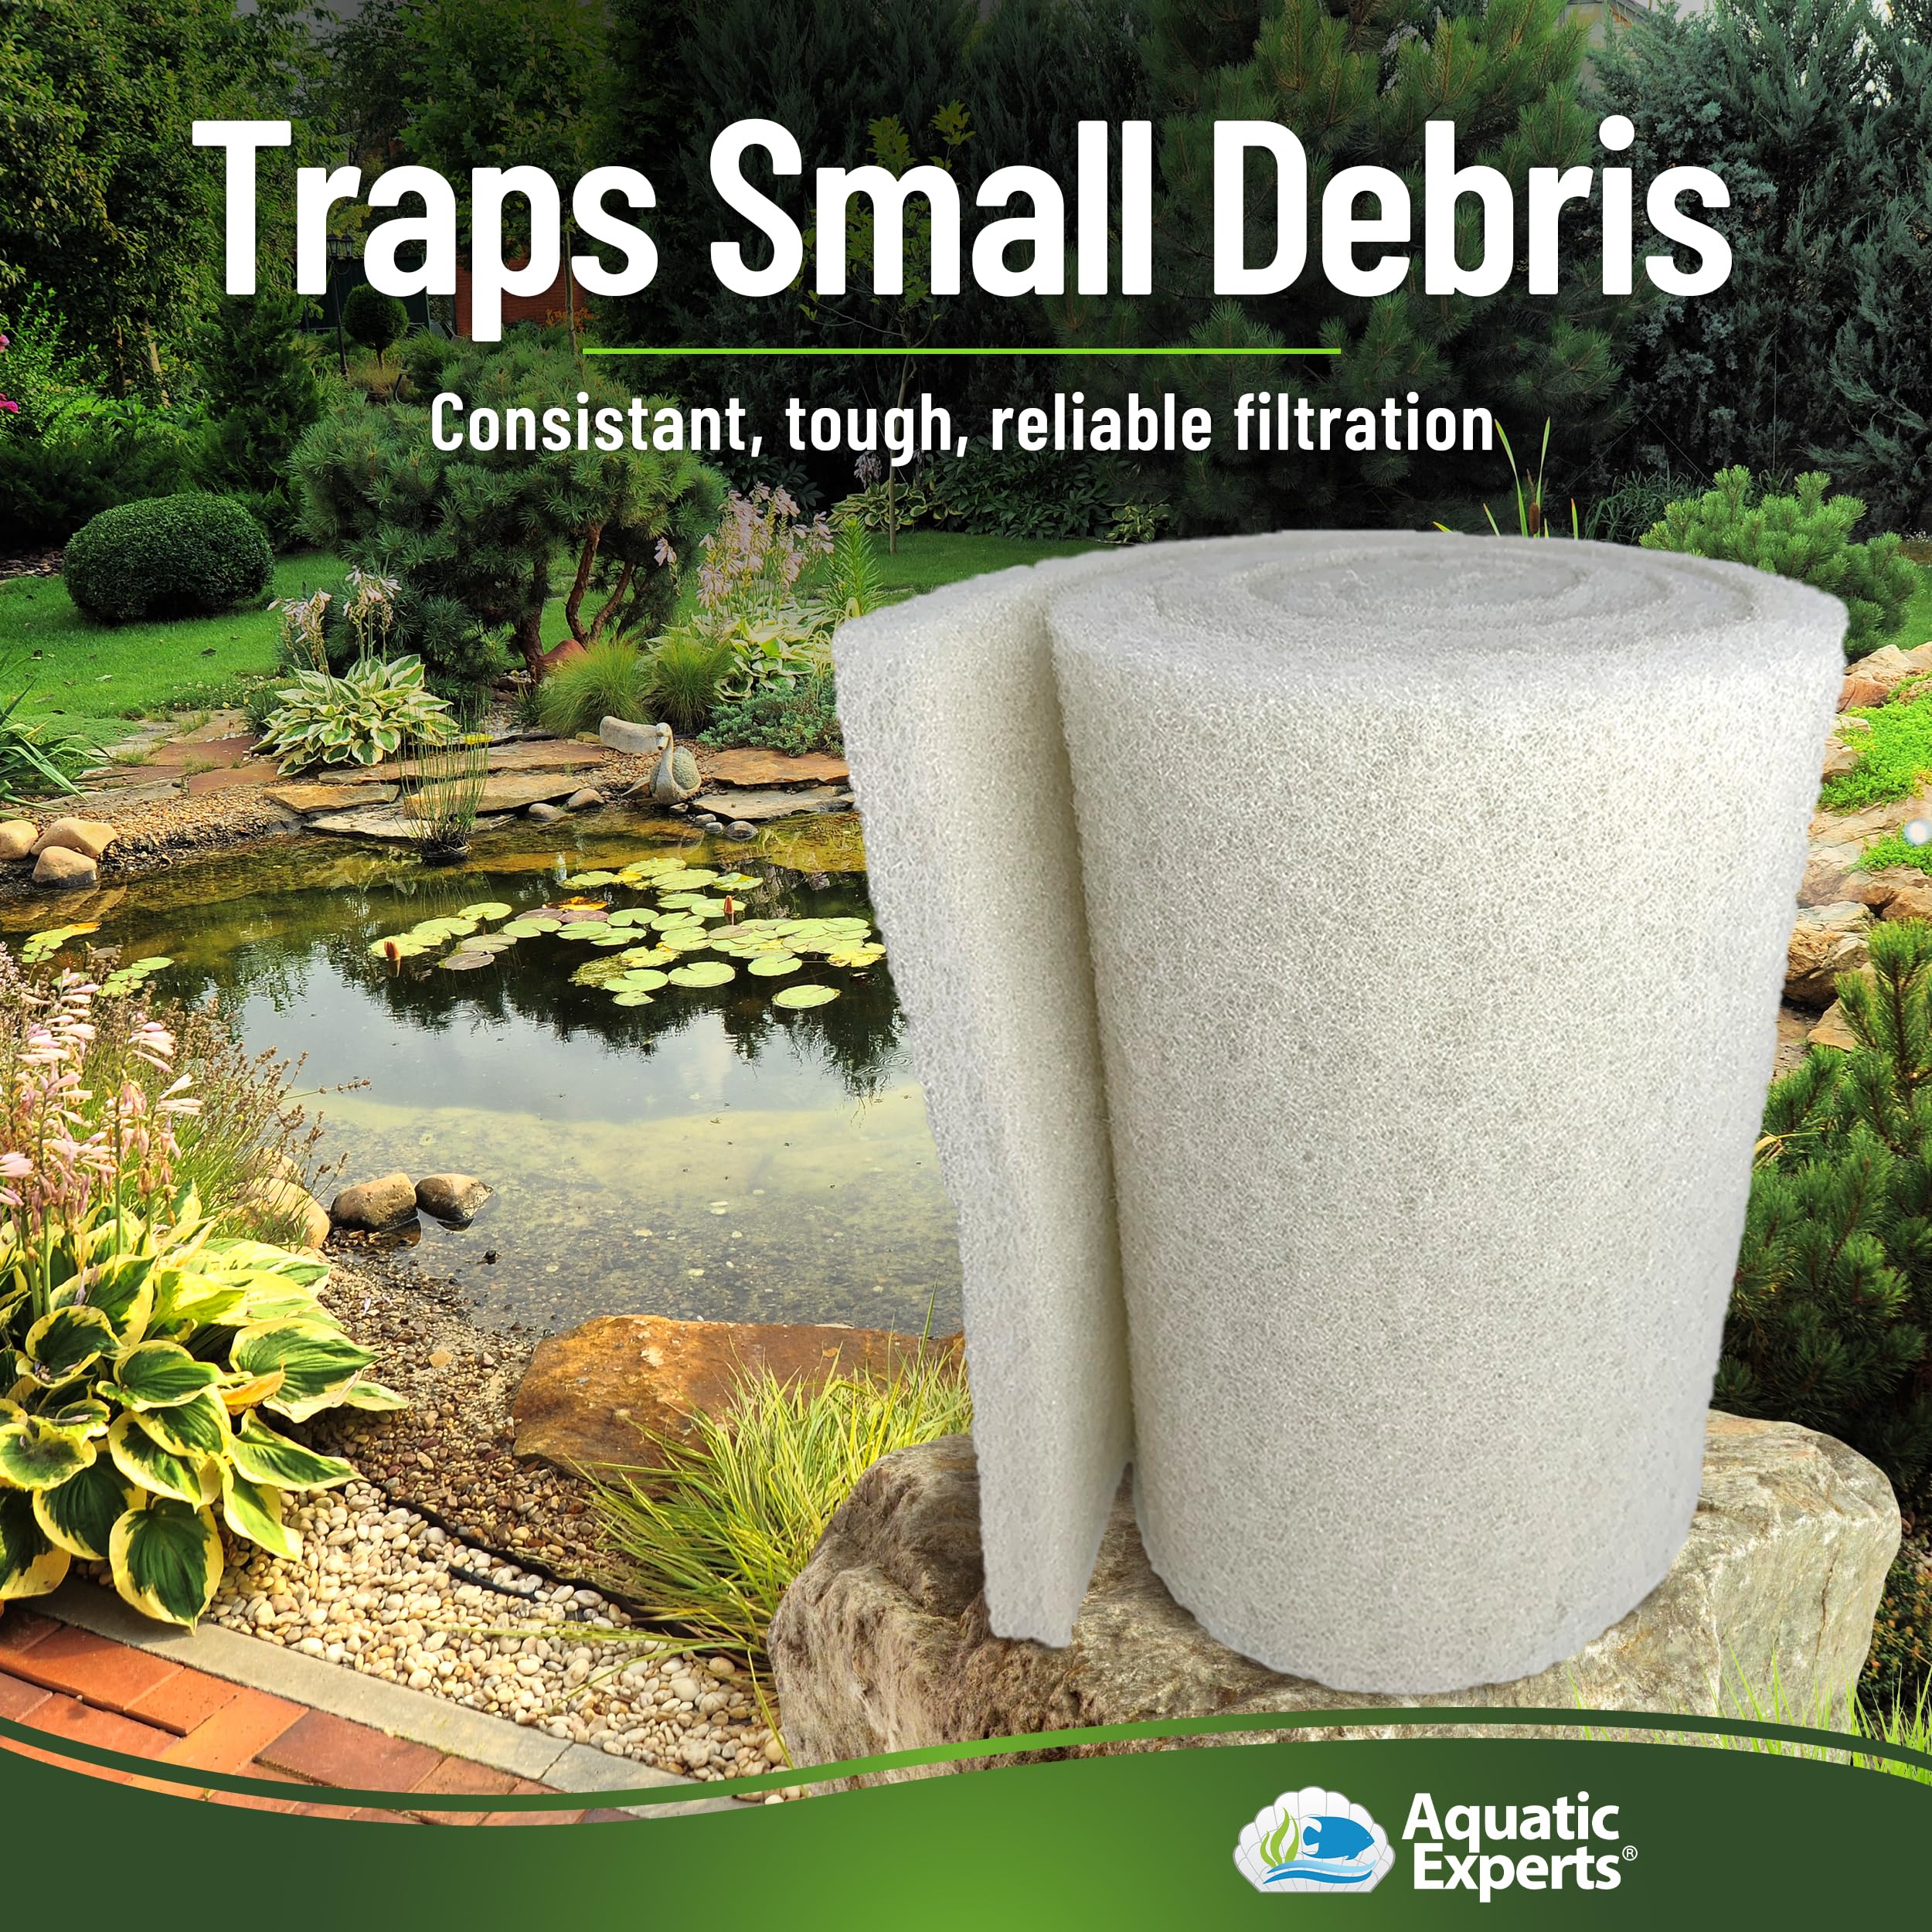 Classic Koi Pond Filter Pad FINE - White Bulk Roll Pond Filter Media, Ultra-Durable Pond Filters for Outdoor Ponds, Reusable Fish Pond Filter Material, USA, Aquatic Experts (3/4" - 1" x 12" x 72")